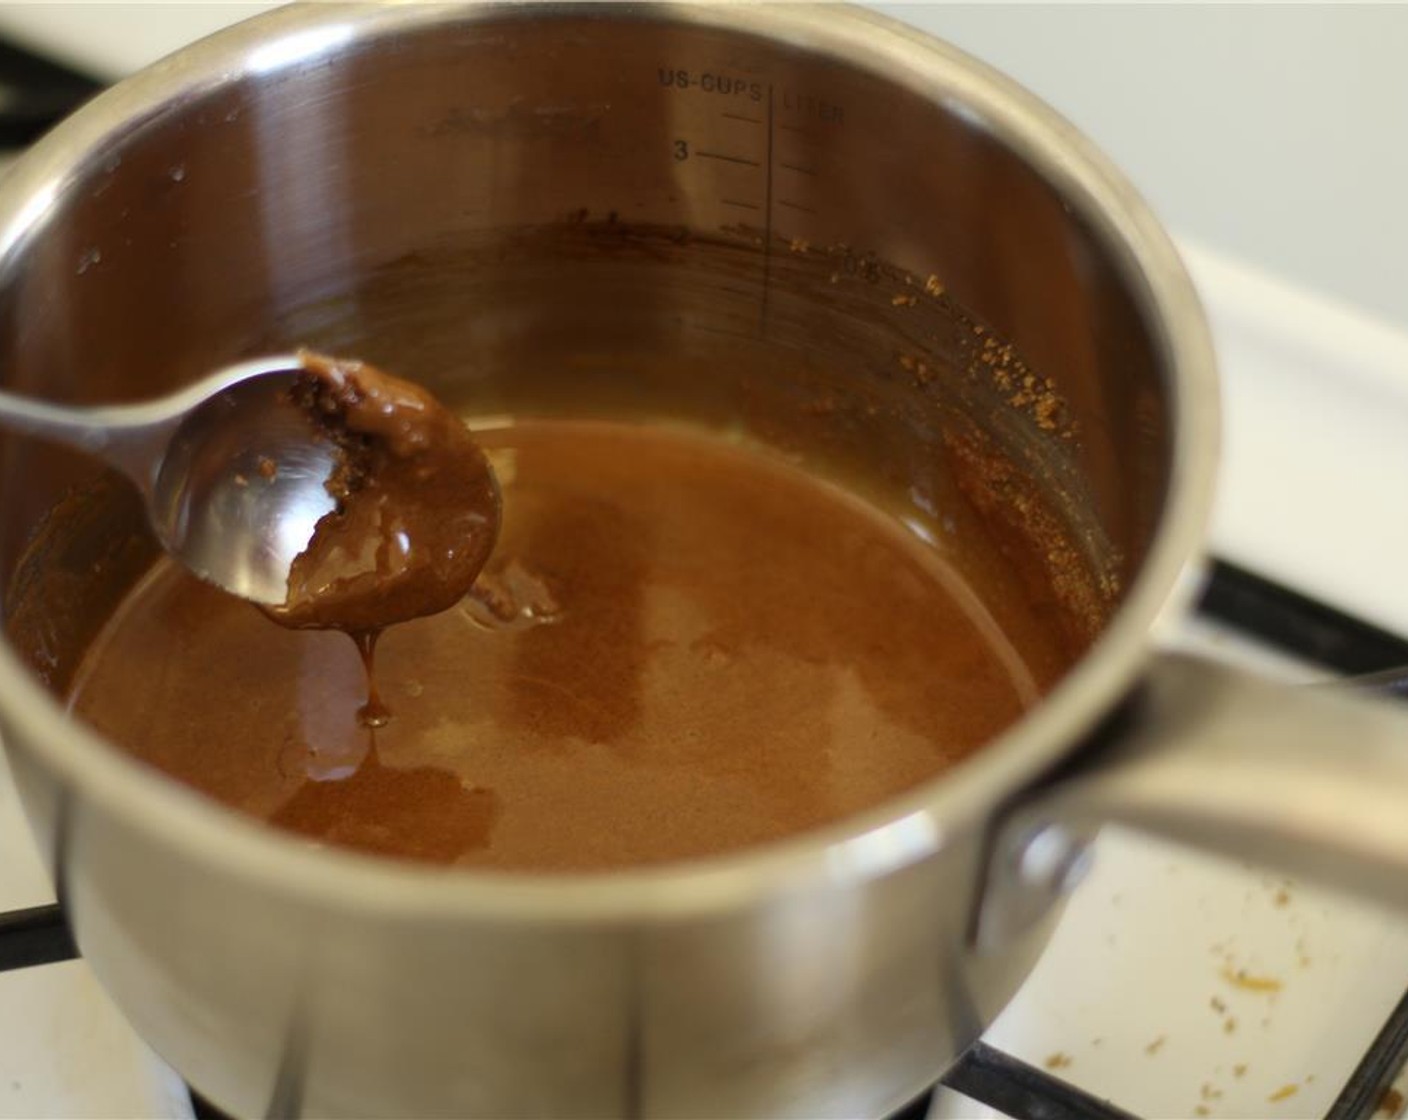 step 2 Pour the Raw Cane Sugar (1 cup) into a small saucepan. Heat it over medium heat, and stir the sugar until it starts to melt. Turn the heat down to medium-low and continue stirring until it has melted completely.